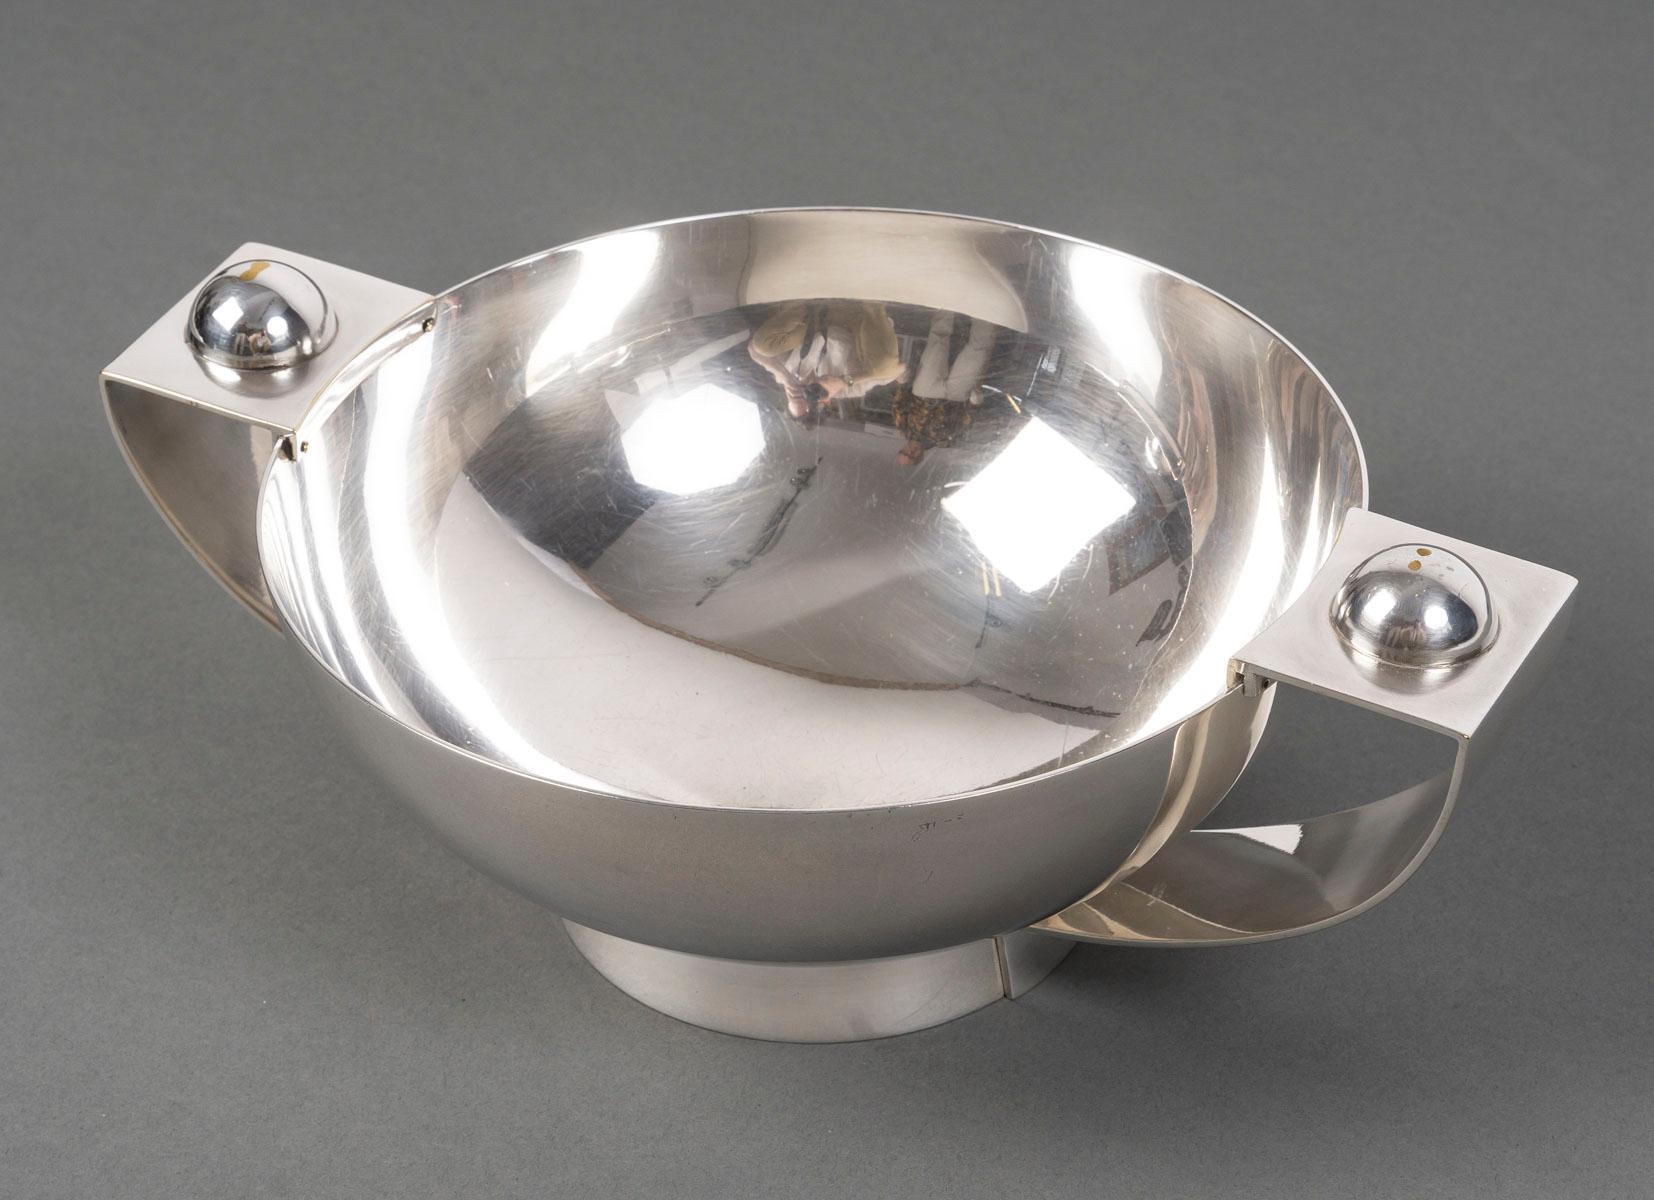 Plain round cup mounted on a 2 cm stick and flanked by two detached side handles

resting on the collar and fixed on the stick.

Dimensions: Inner diameter 21 cm - height 10 cm

Material: Silver metal

Goldsmith hallmark: CHRISTOFLE C C 2